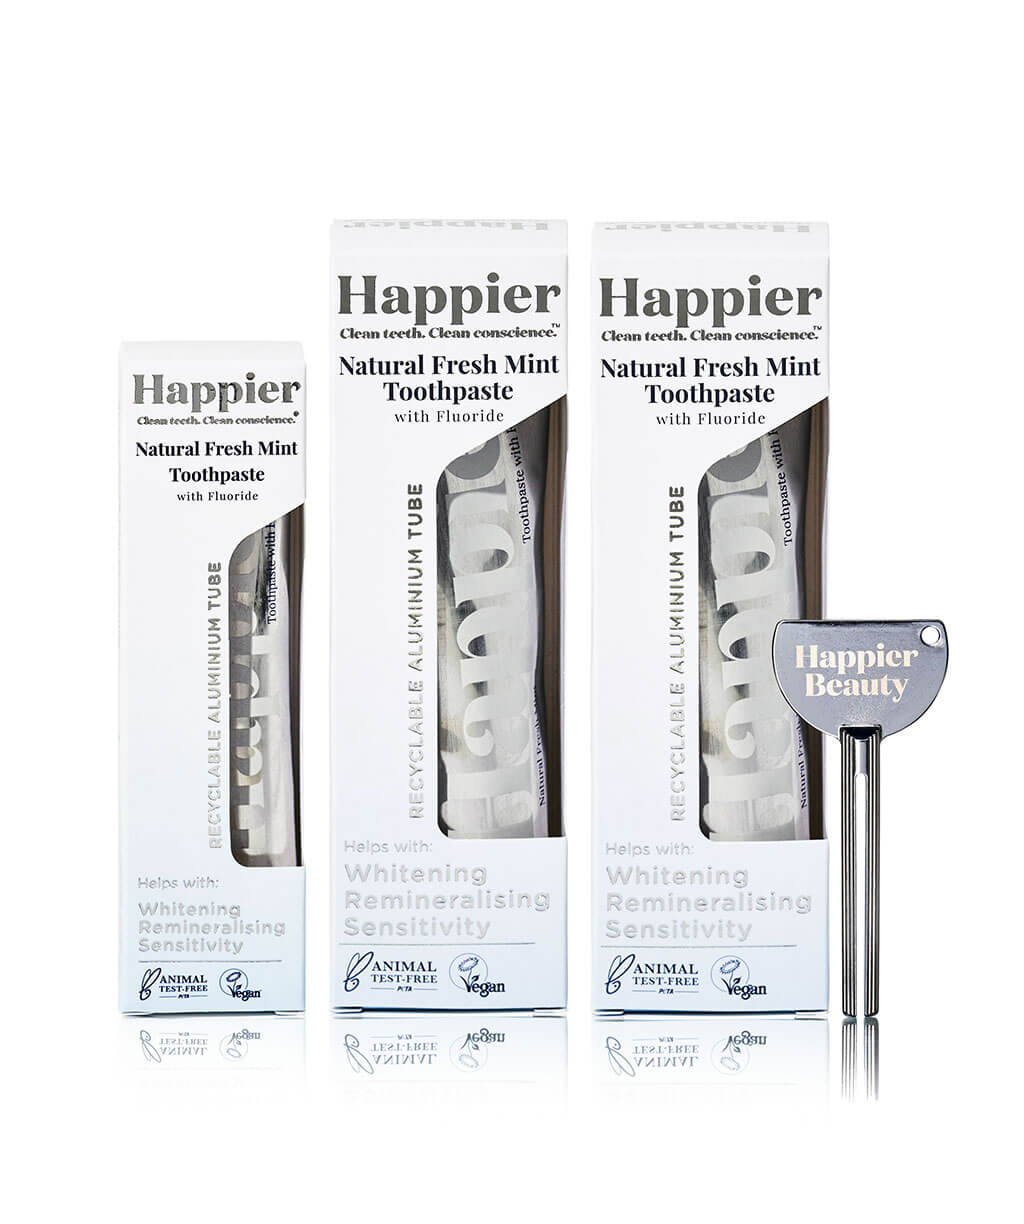 Happier toothbrush set - Complete Home and Away Starter Set for a healthier oral care routine.